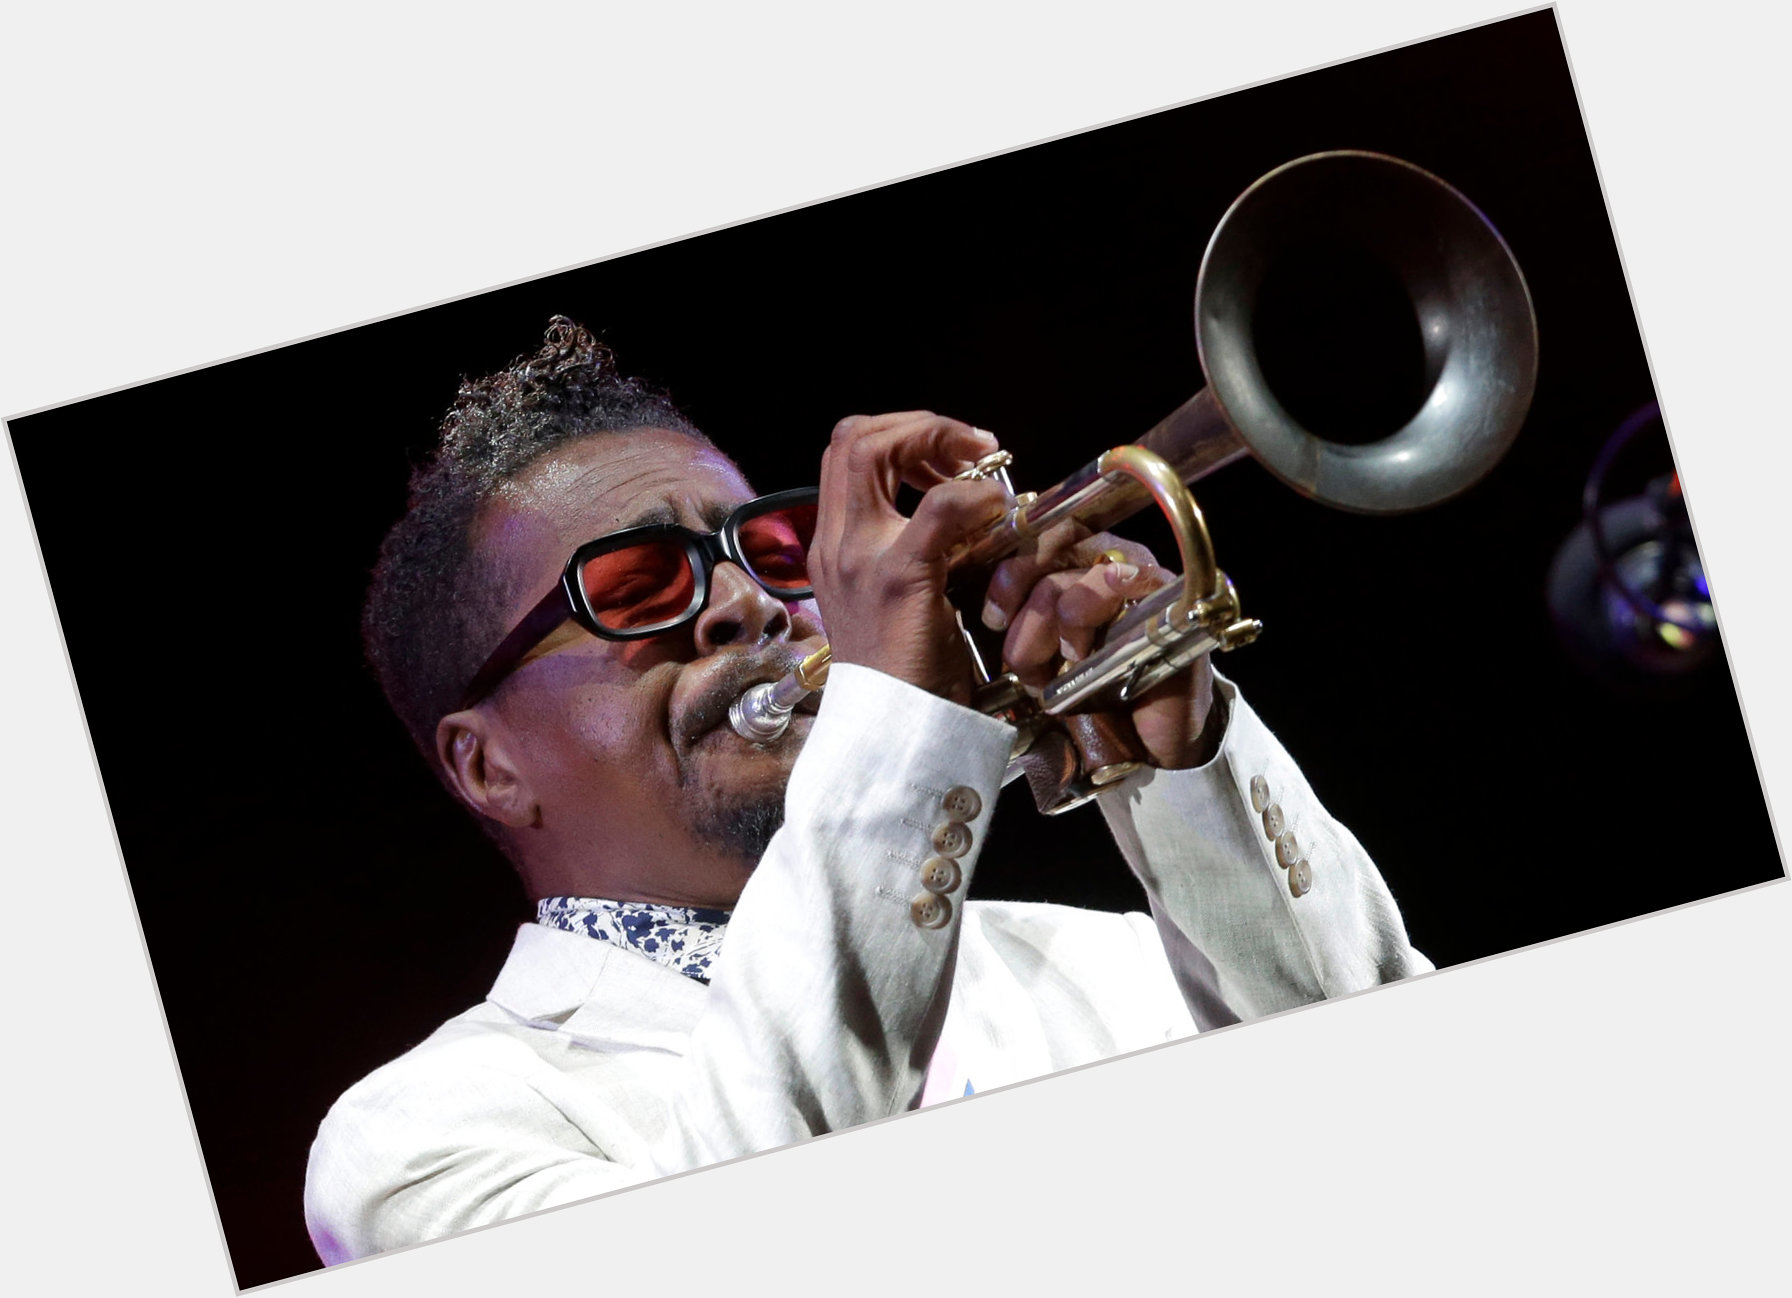 Http://fanpagepress.net/m/R/Roy Hargrove Where Who 9